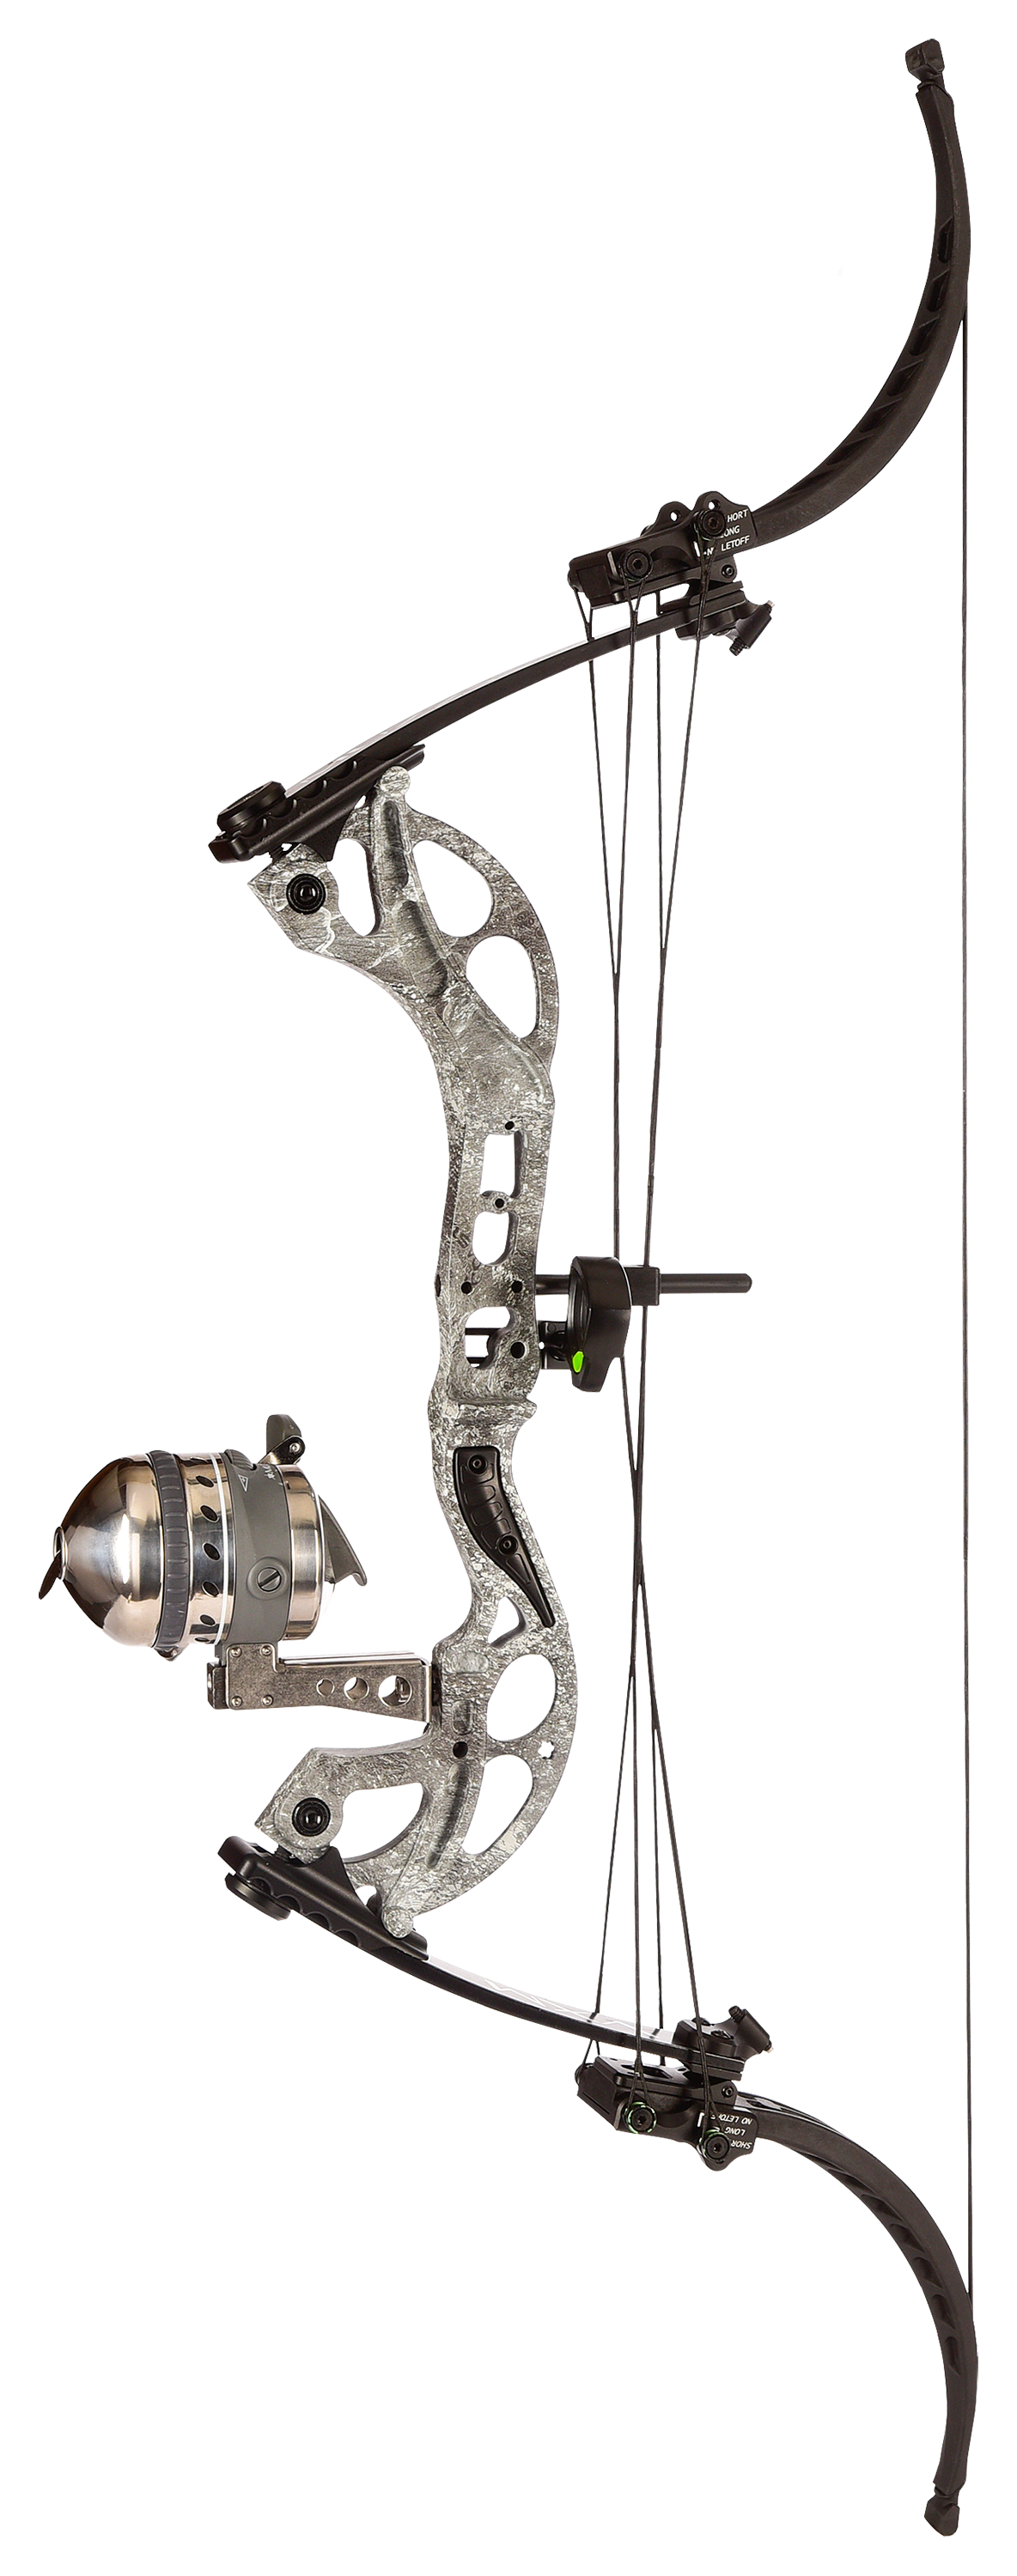 When Is the 2019 Muzzy Classic Bowfishing…